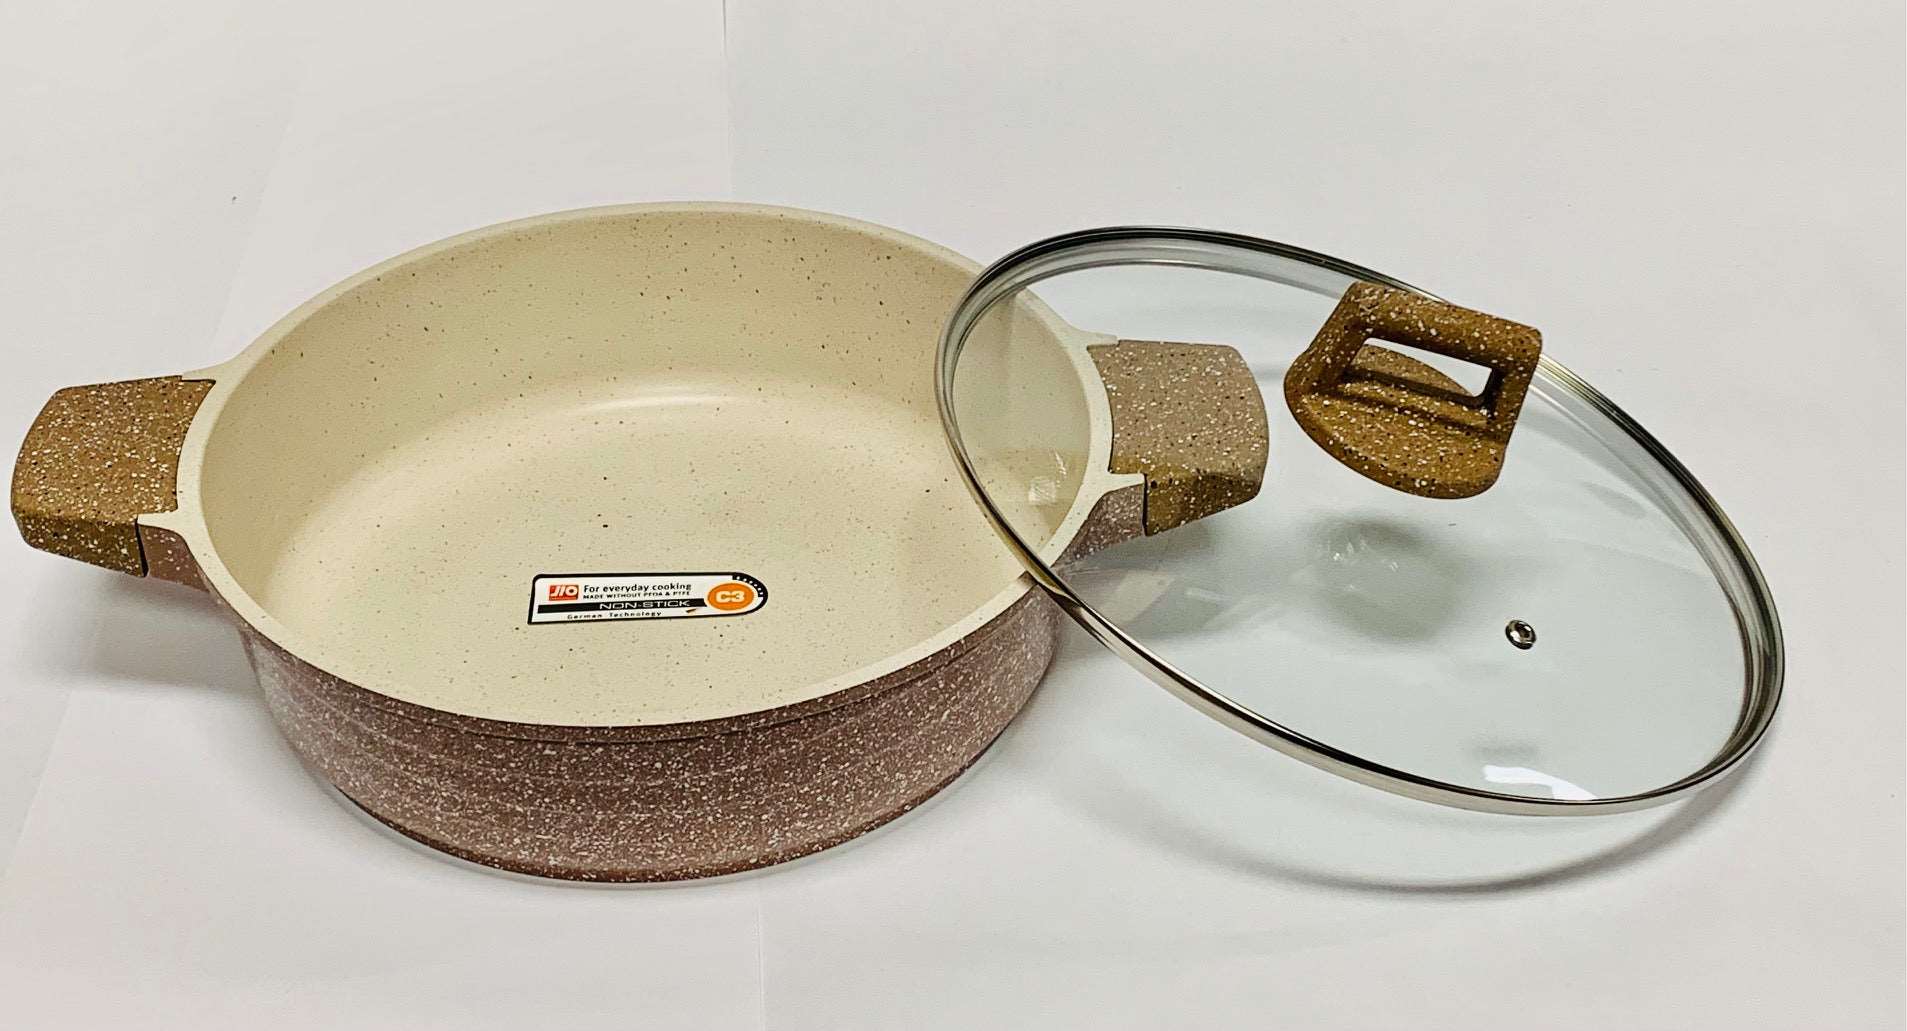 Granite Cookware 28cm Casserole Brown 100% Eco Friendly with Glass Cover - Royal Gift